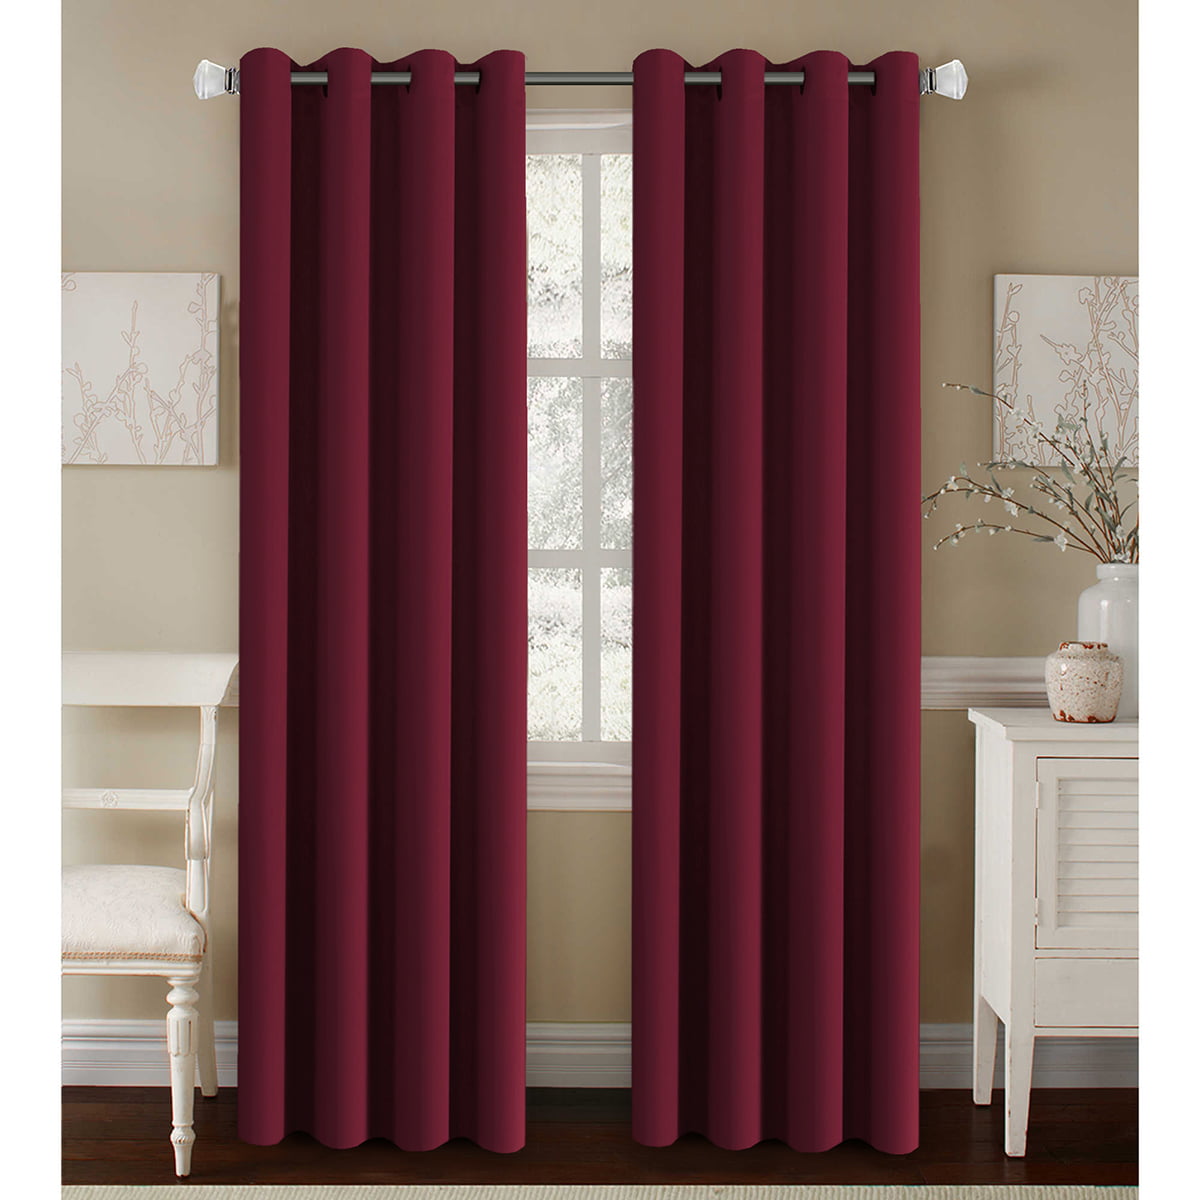 H.VERSAILTEX Thermal Insulated Blackout Ultra Soft Elegant Window Curtains for Bedroom,Christmas Deals Curtain Panels,Antique Grommet-52 inchW by 84 inchL-Burgundy Red